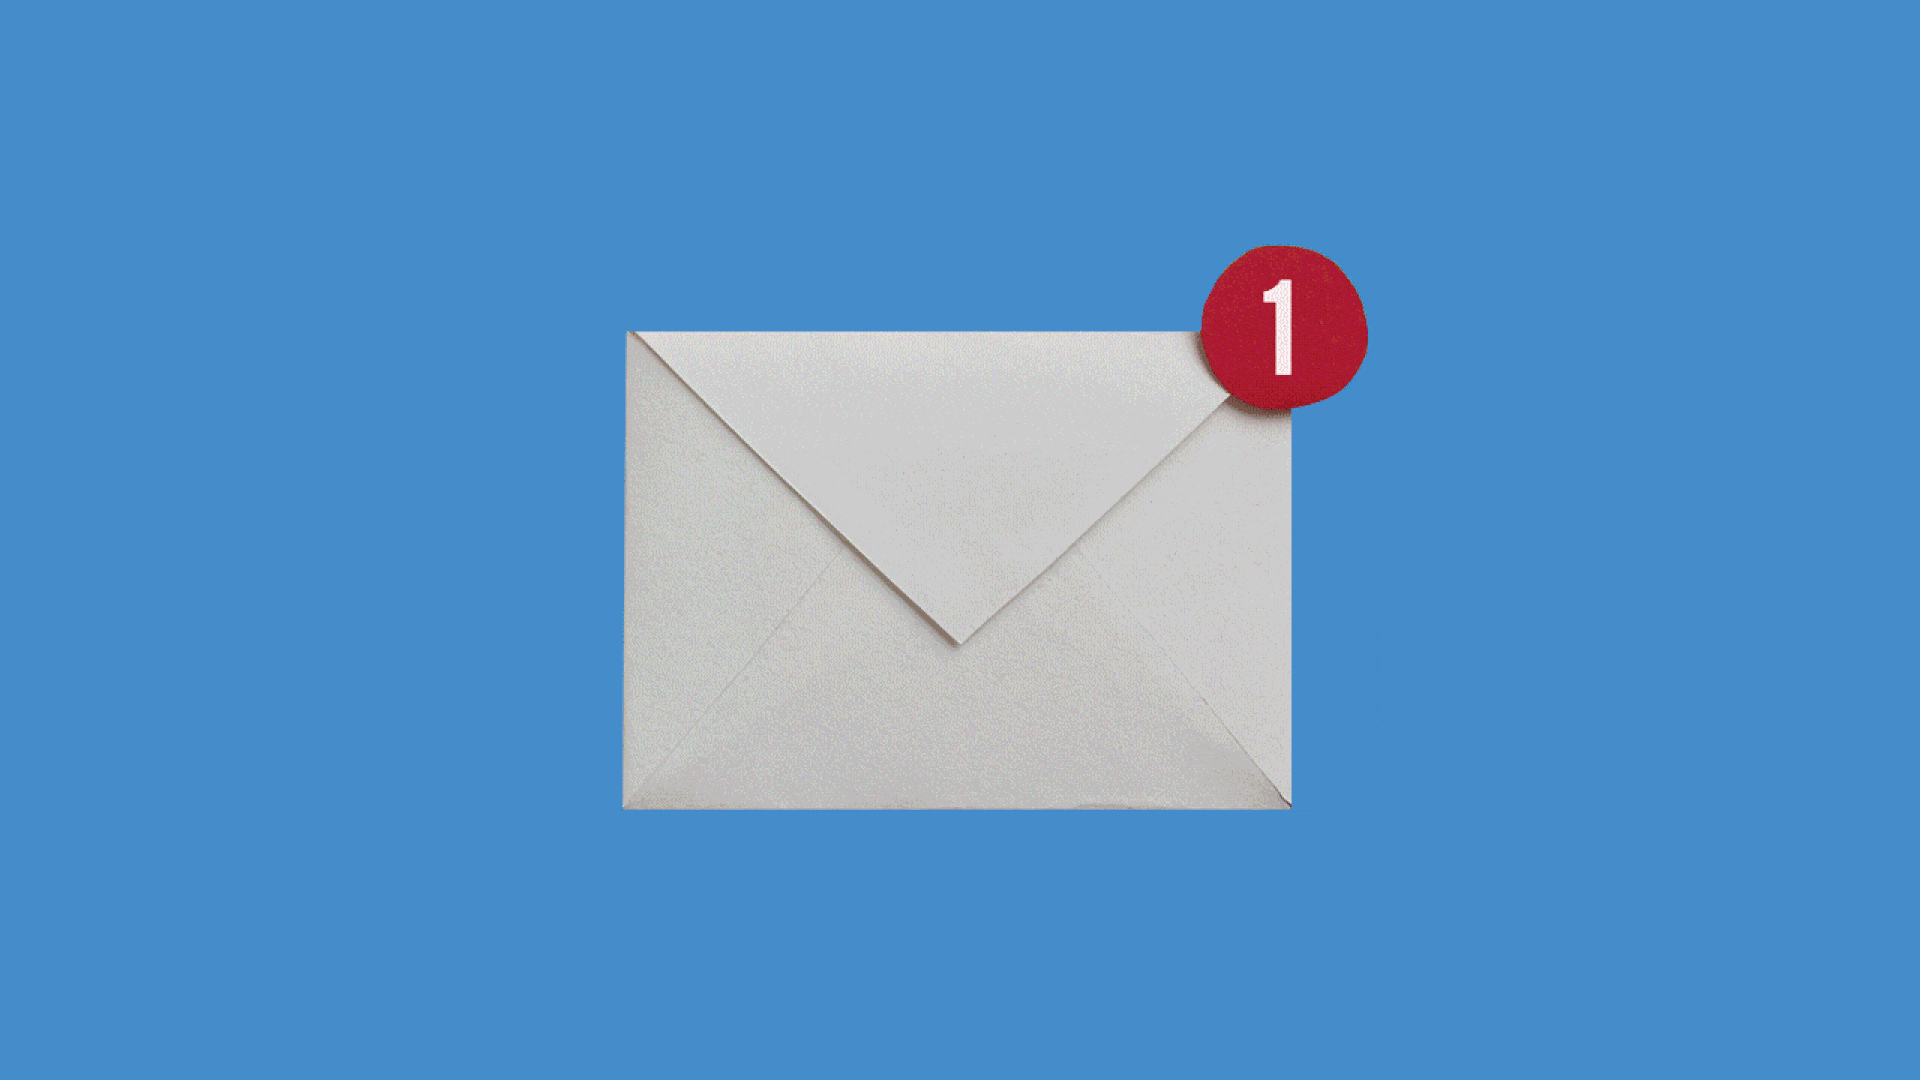 Animated illustration of a letter icon with an alert morphing into a new message badge